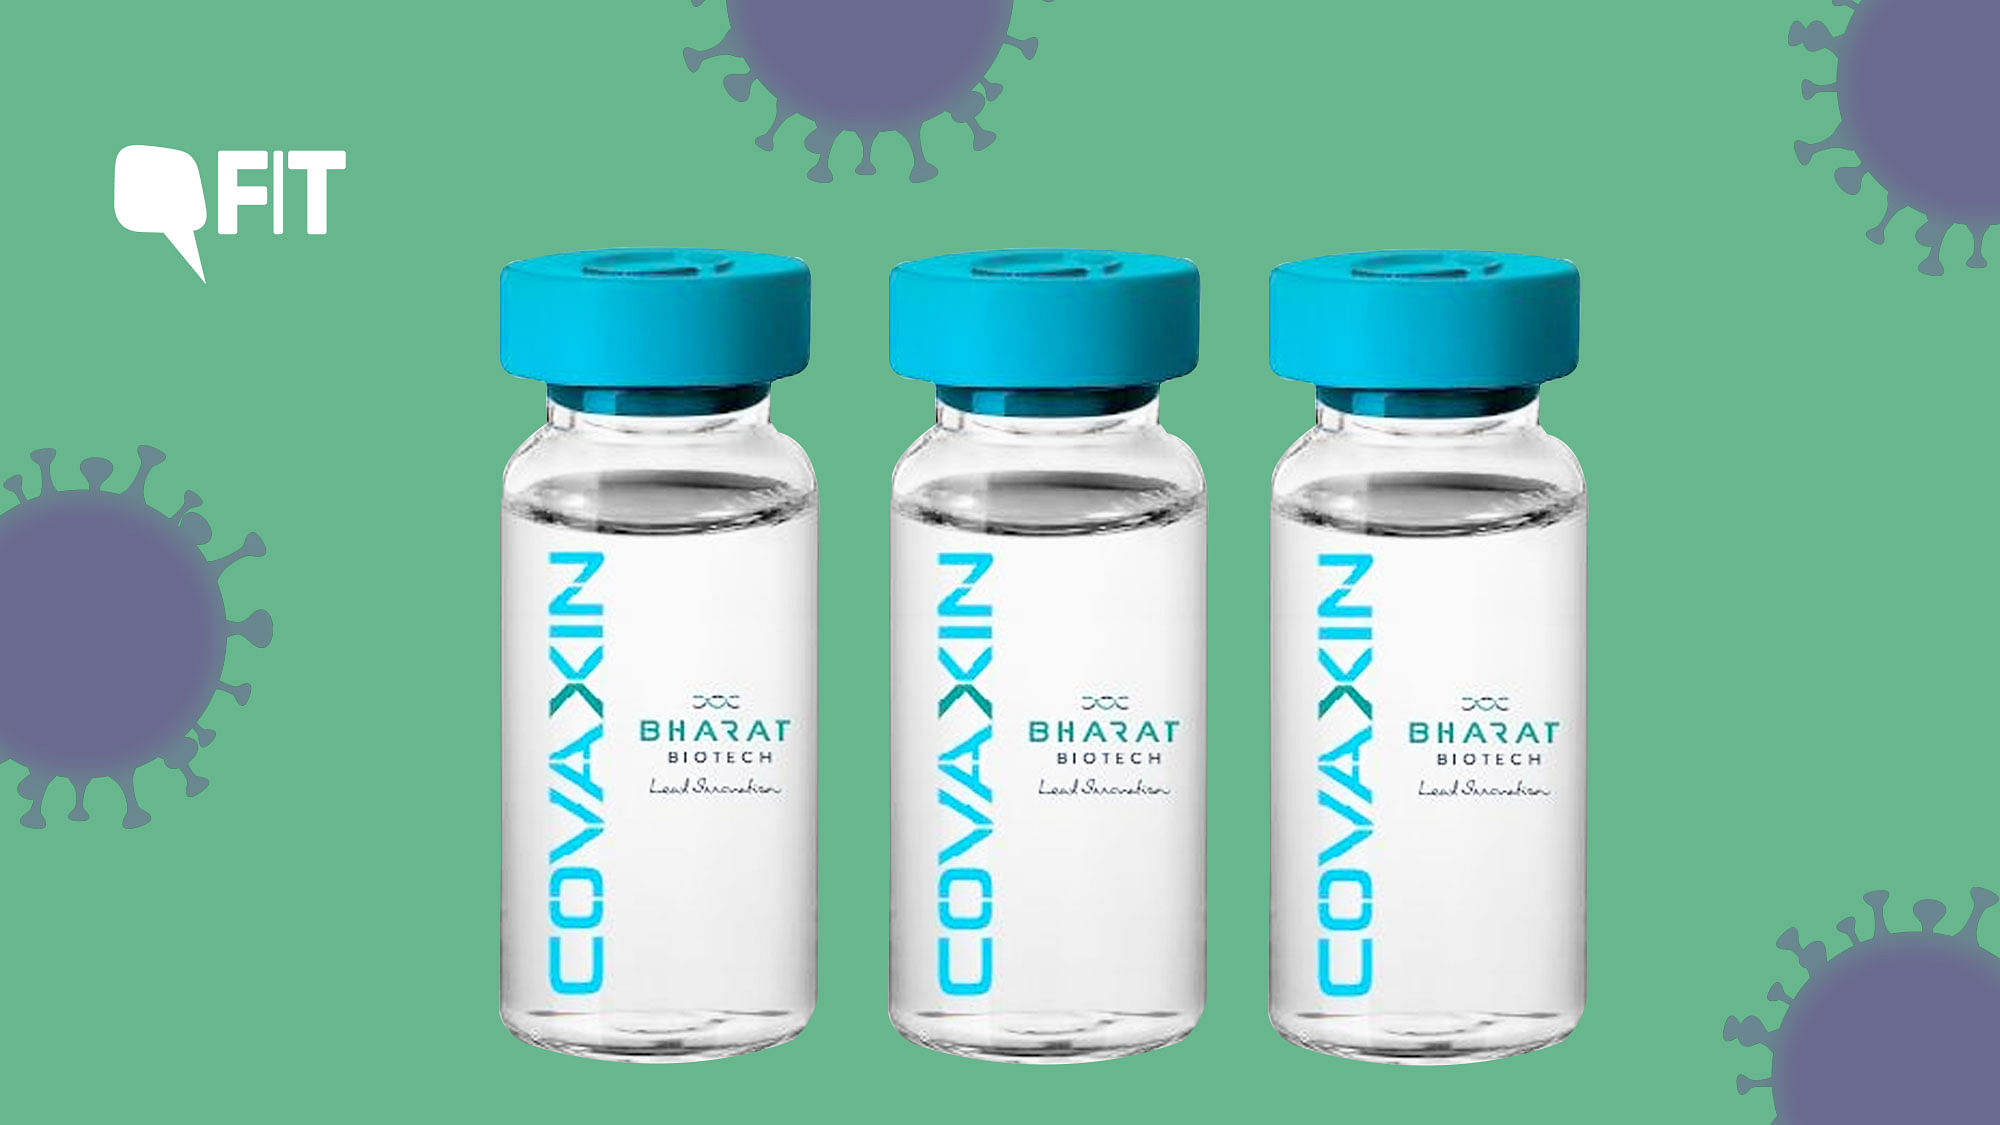 Bharat Biotech, the company which is developing one of India’s indigenous vaccine candidates called ‘Covaxin’, expects that the shot will be ready by June 2021.